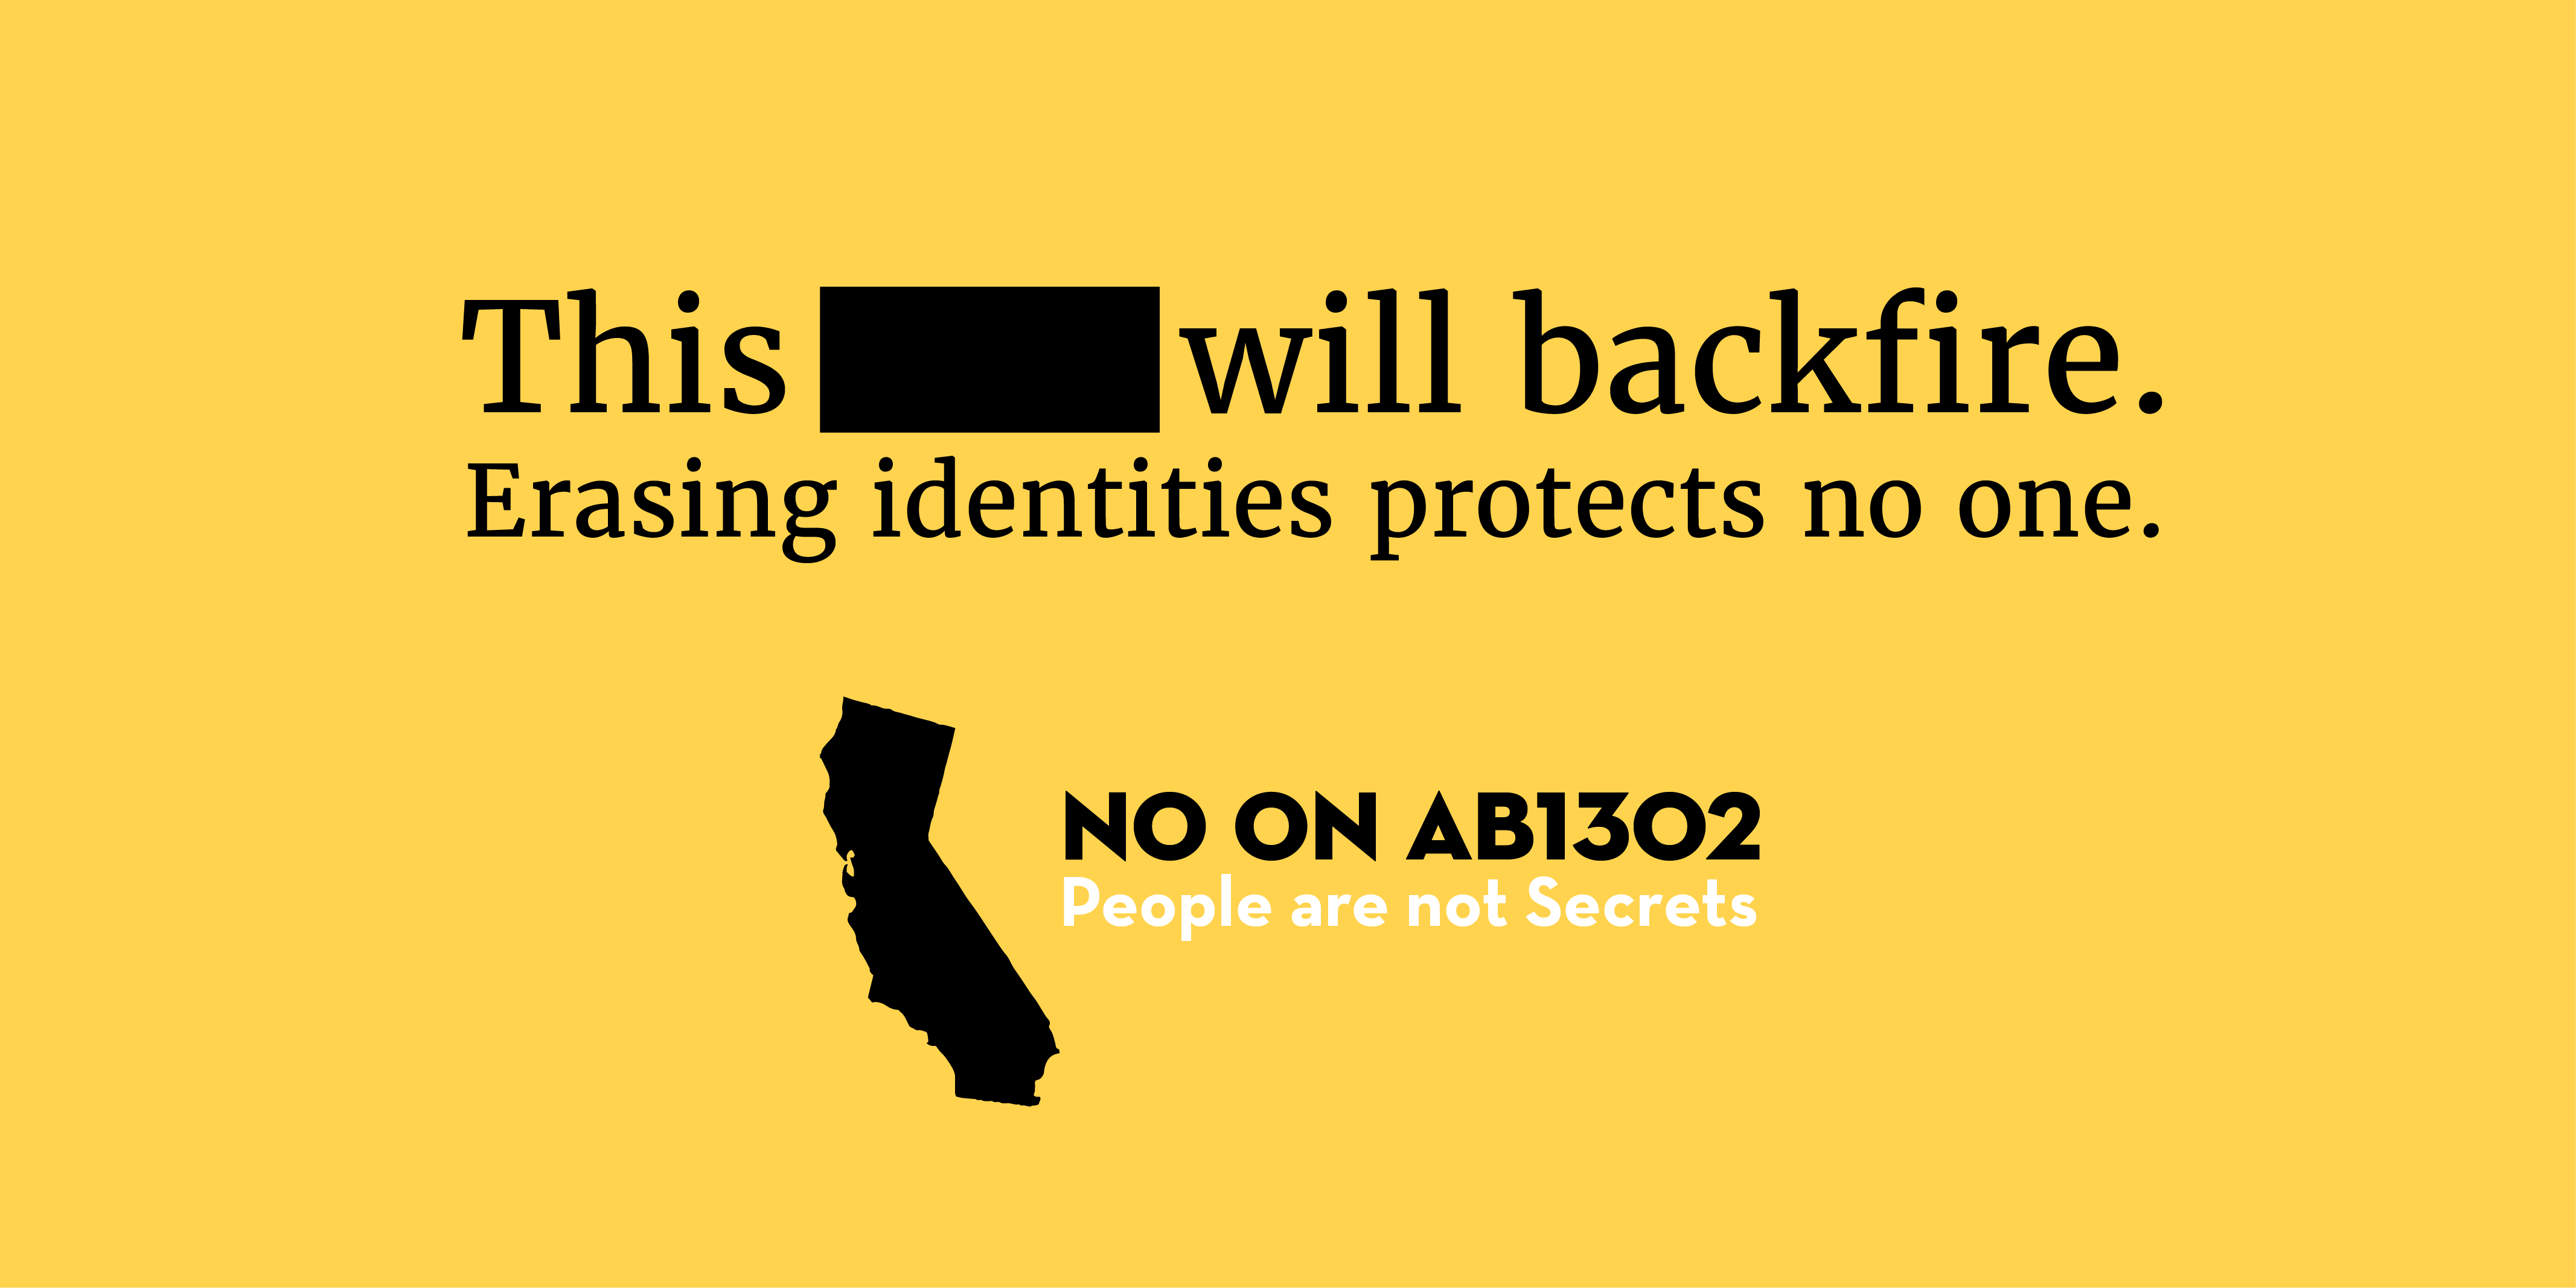 This will backfire. Erasing identifies protects no one. No on AB1302. People are not secrets.